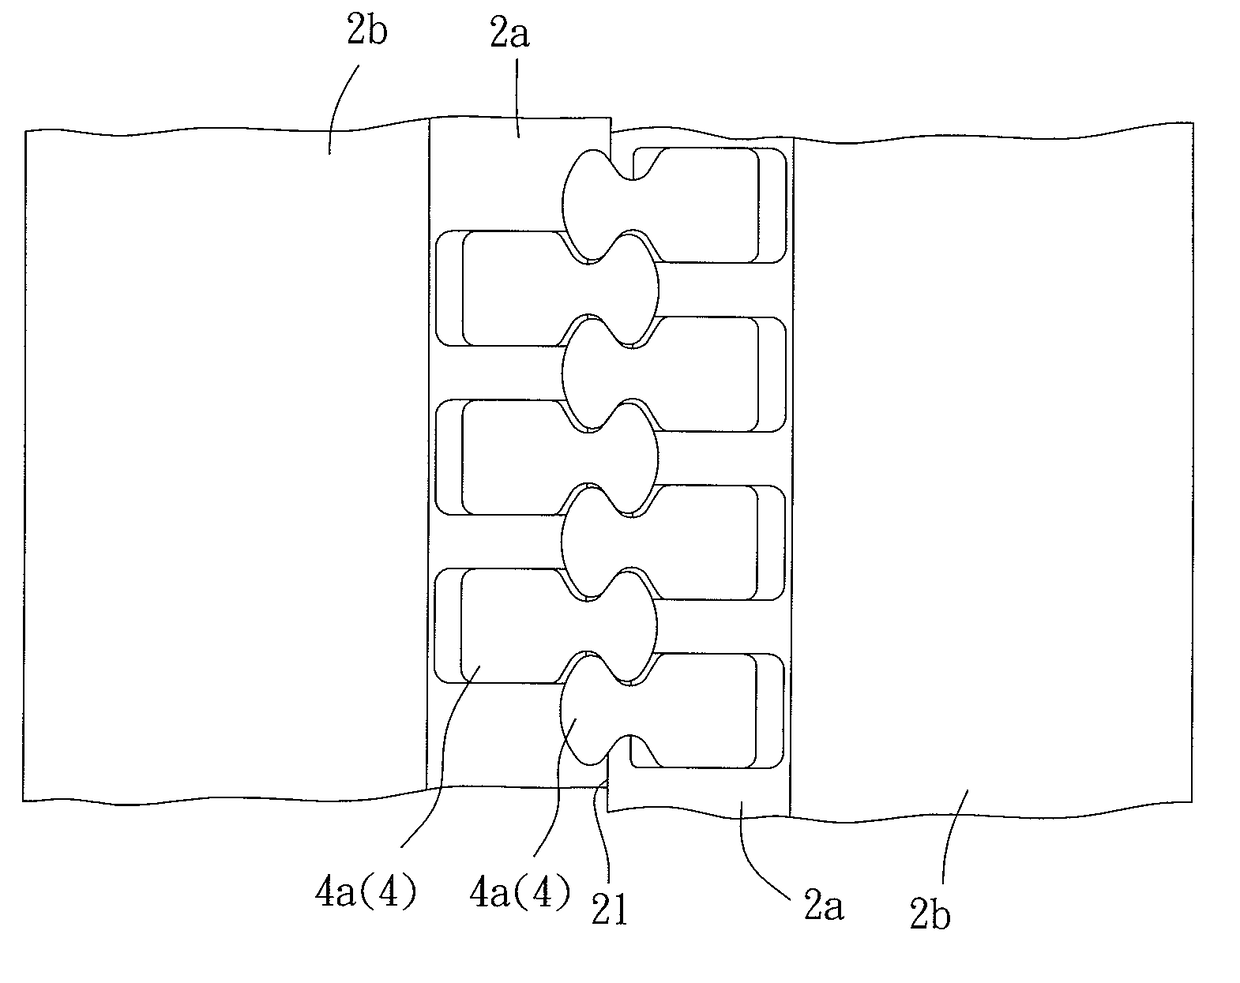 Method for Manufacturing A Watertight Zipper